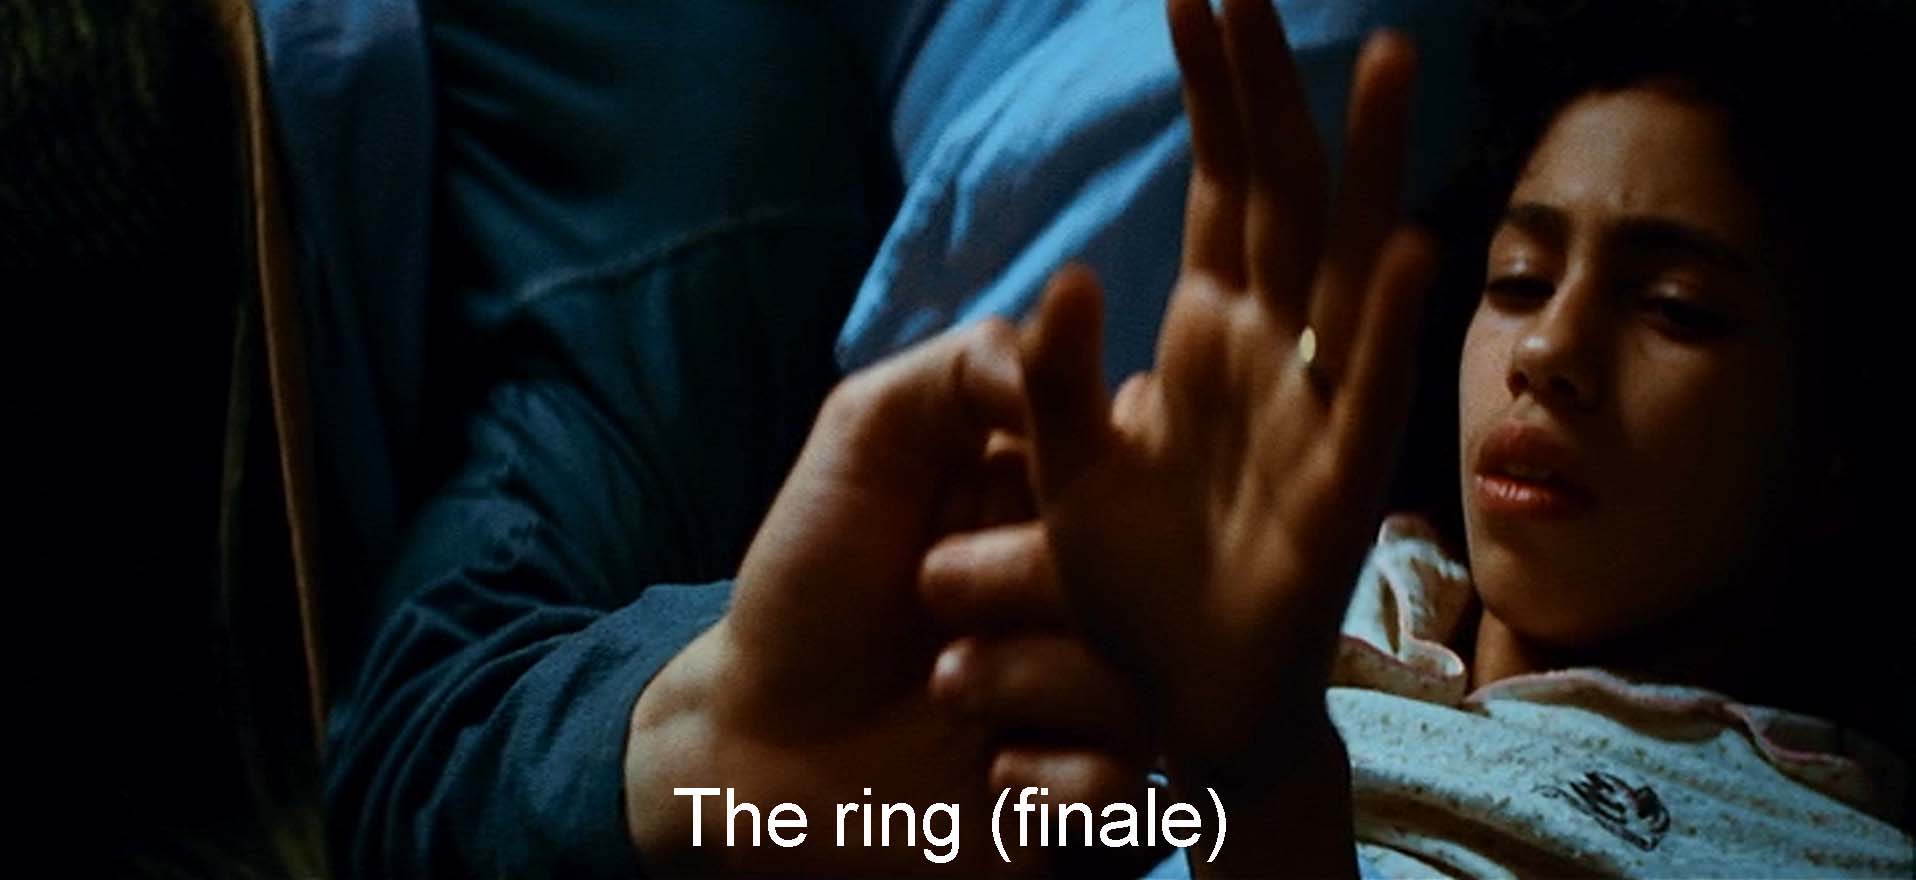 The ring (finale)